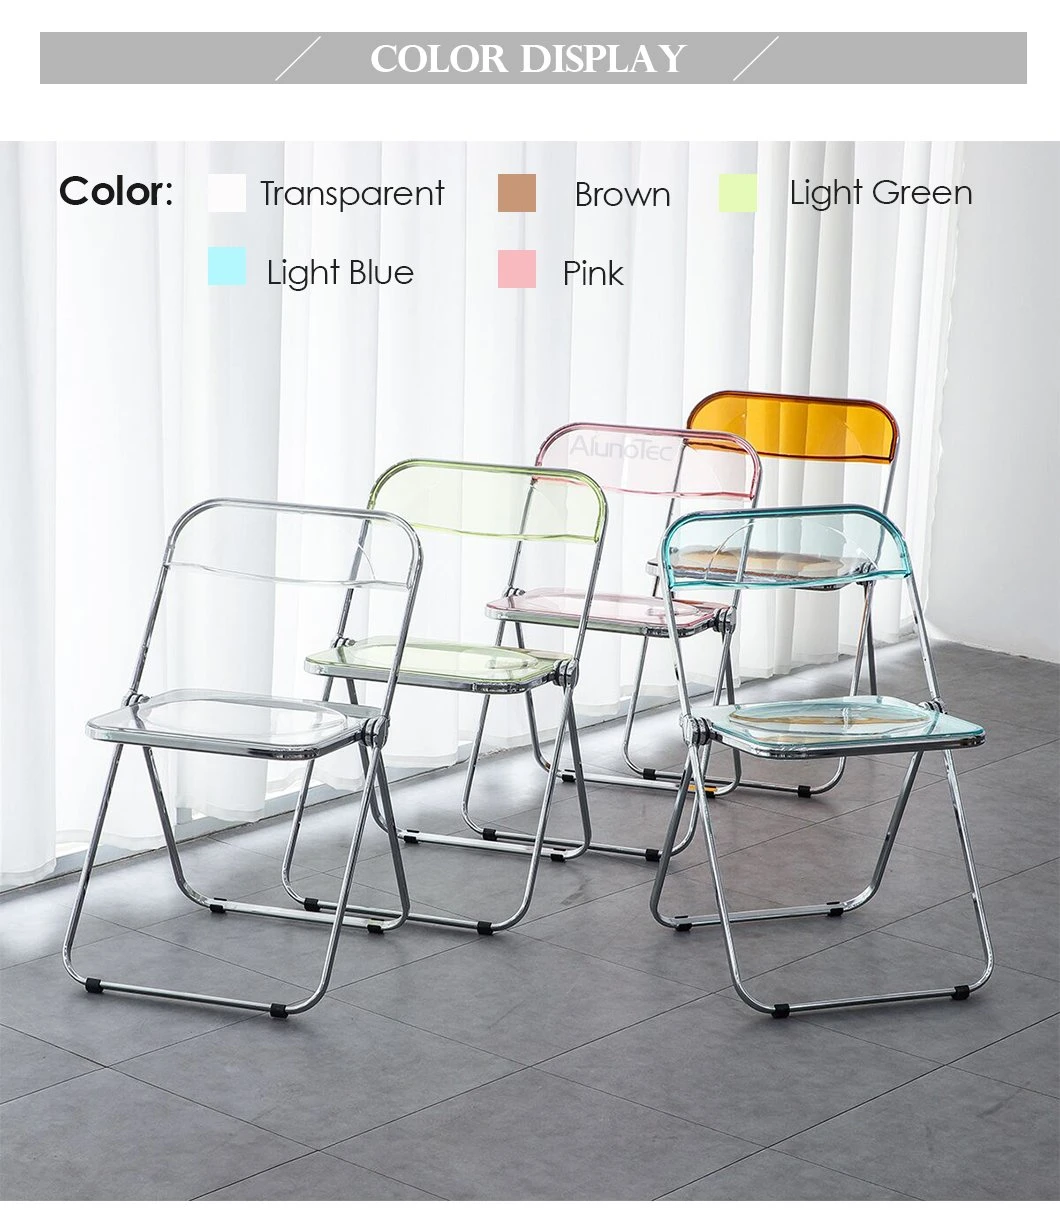 Easy Carry Modern Transparent Design Plastic Chair Light Weight Folding Chairs